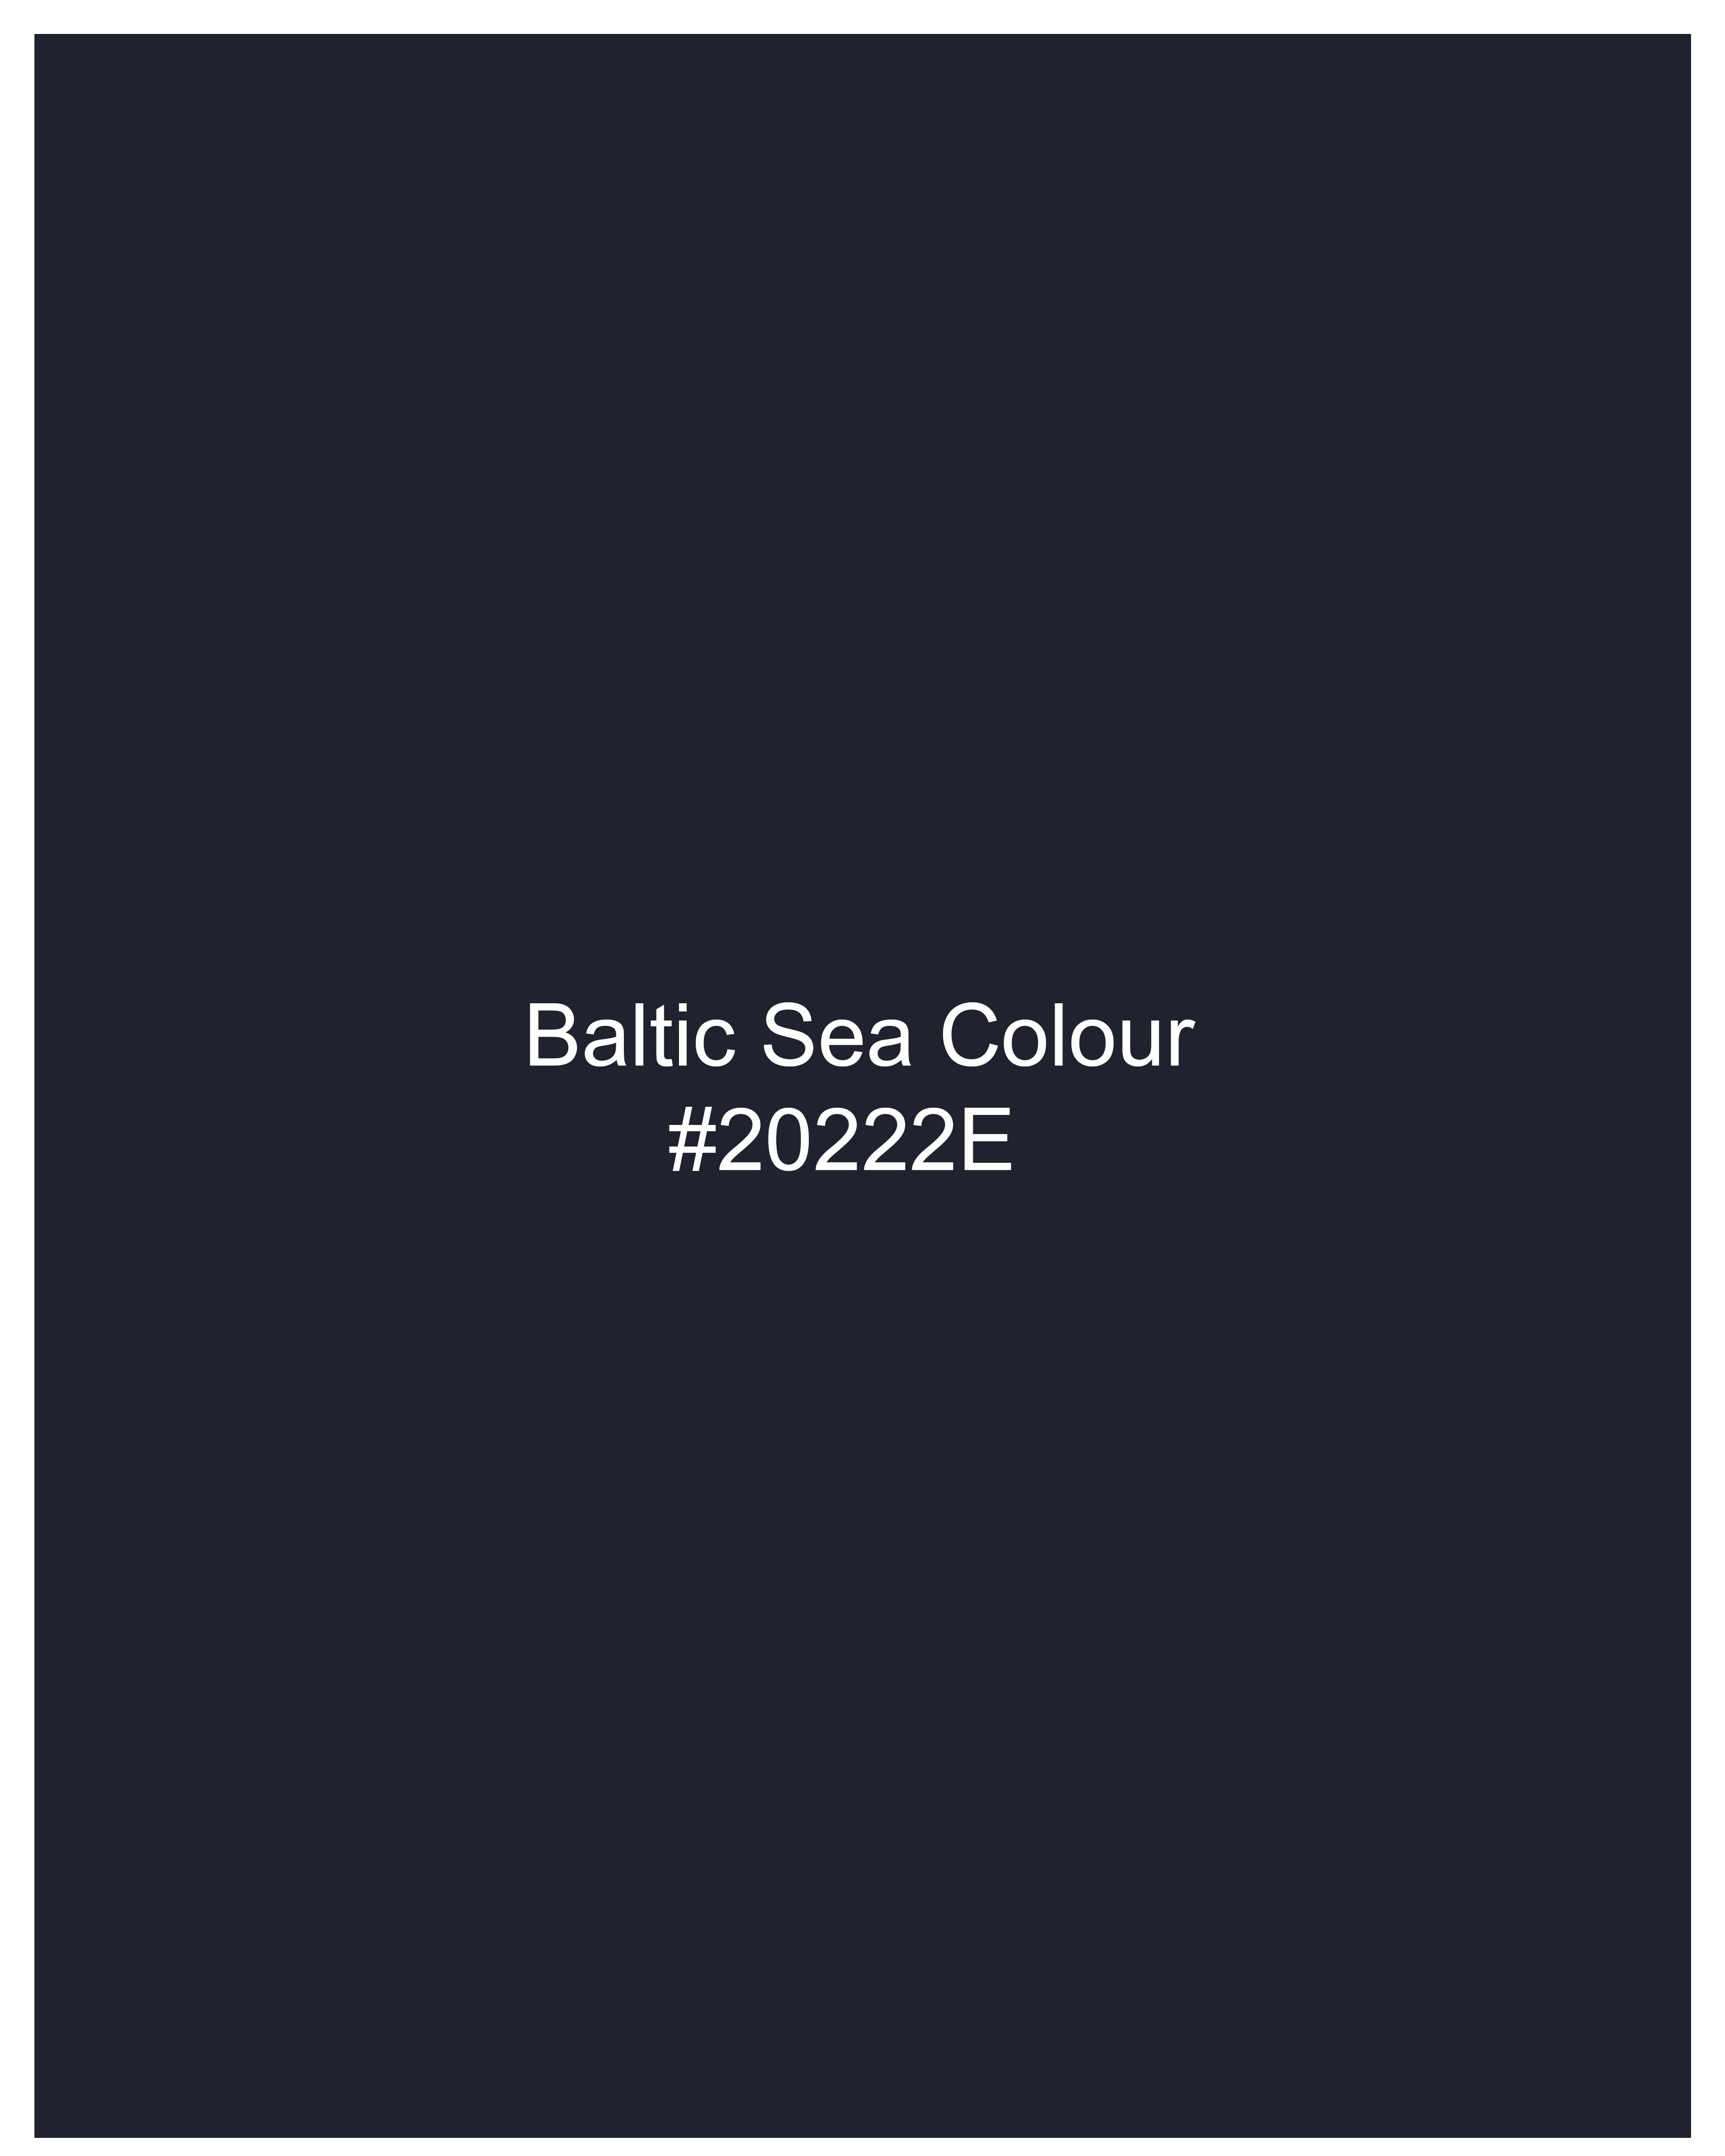 Baltic Sea Navy Blue Double Breasted Suit ST2489-DB-2B-36, ST2489-DB-2B-38, ST2489-DB-2B-40, ST2489-DB-2B-42, ST2489-DB-2B-44, ST2489-DB-2B-46, ST2489-DB-2B-48, ST2489-DB-2B-50, ST2489-DB-2B-52, ST2489-DB-2B-54, ST2489-DB-2B-56, ST2489-DB-2B-58, ST2489-DB-2B-60